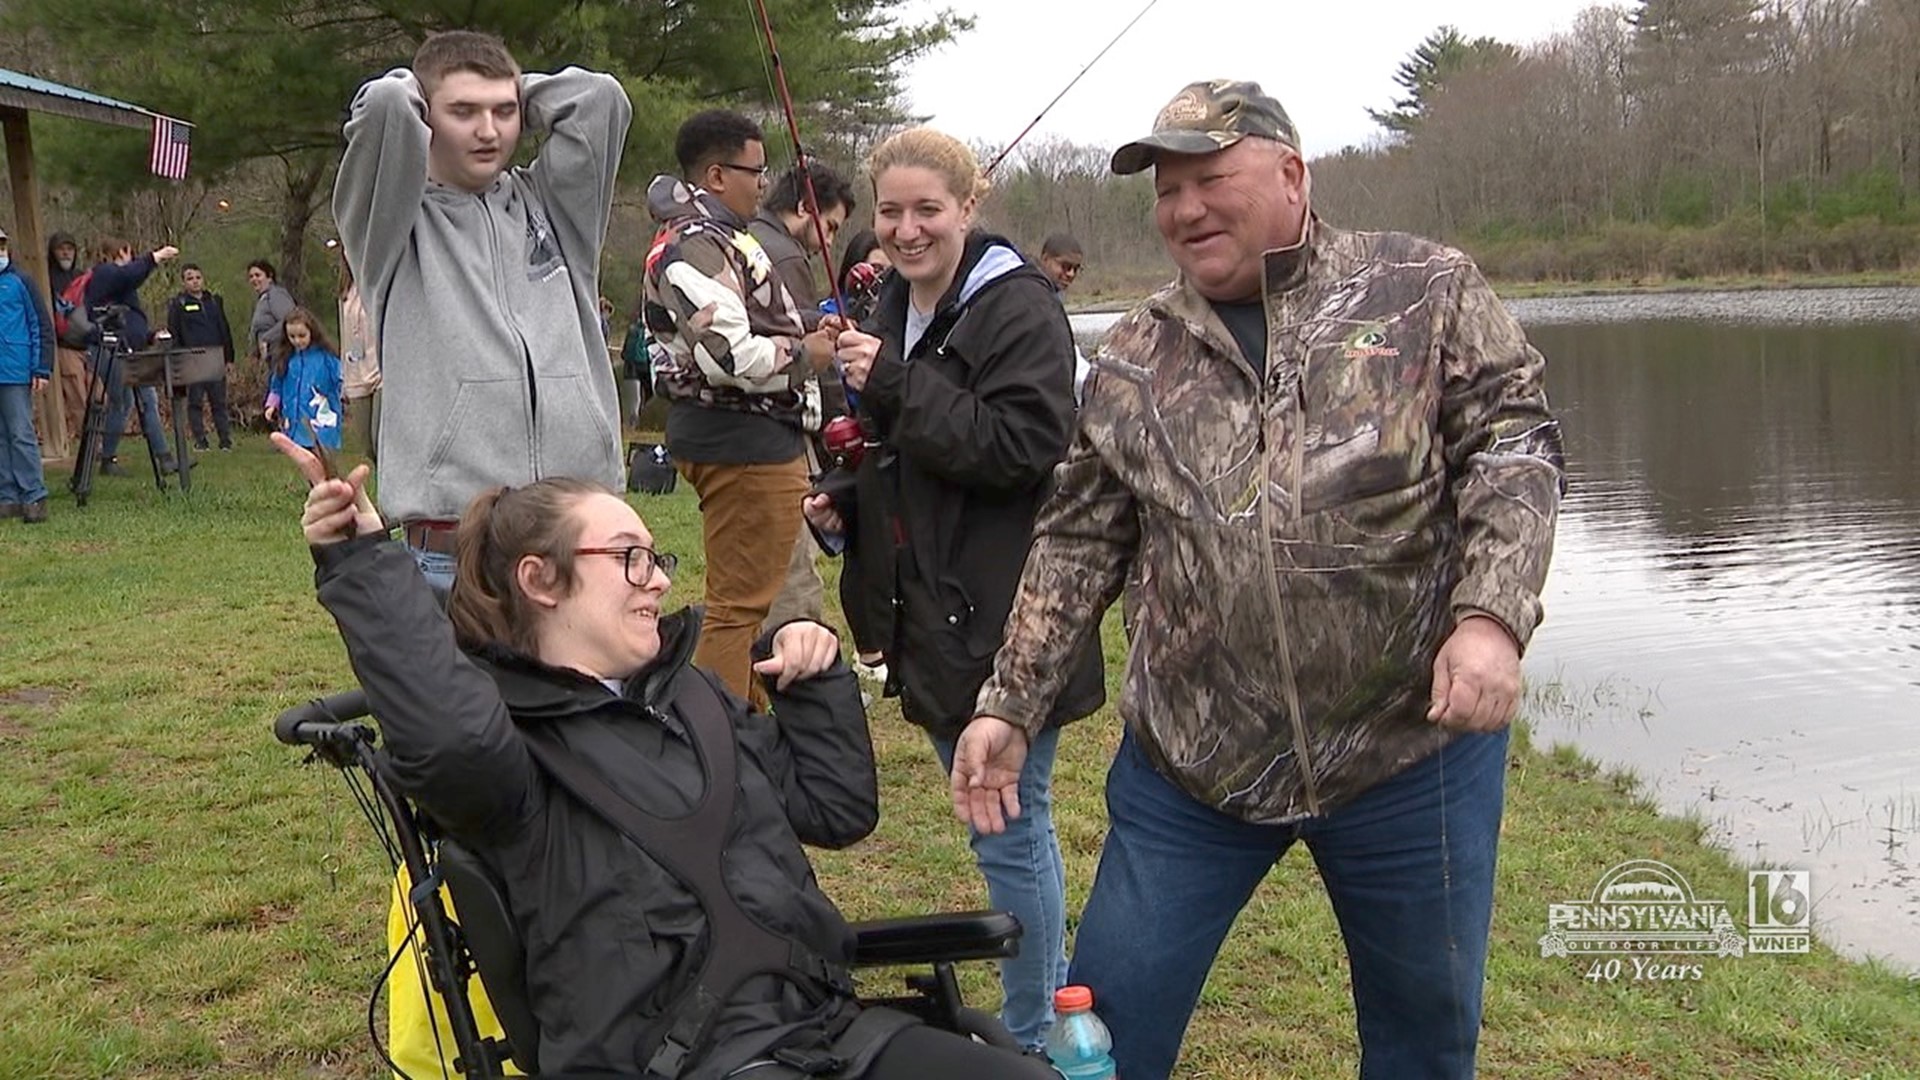 American Legion members creating a safe place for special needs children to fish and have fun.